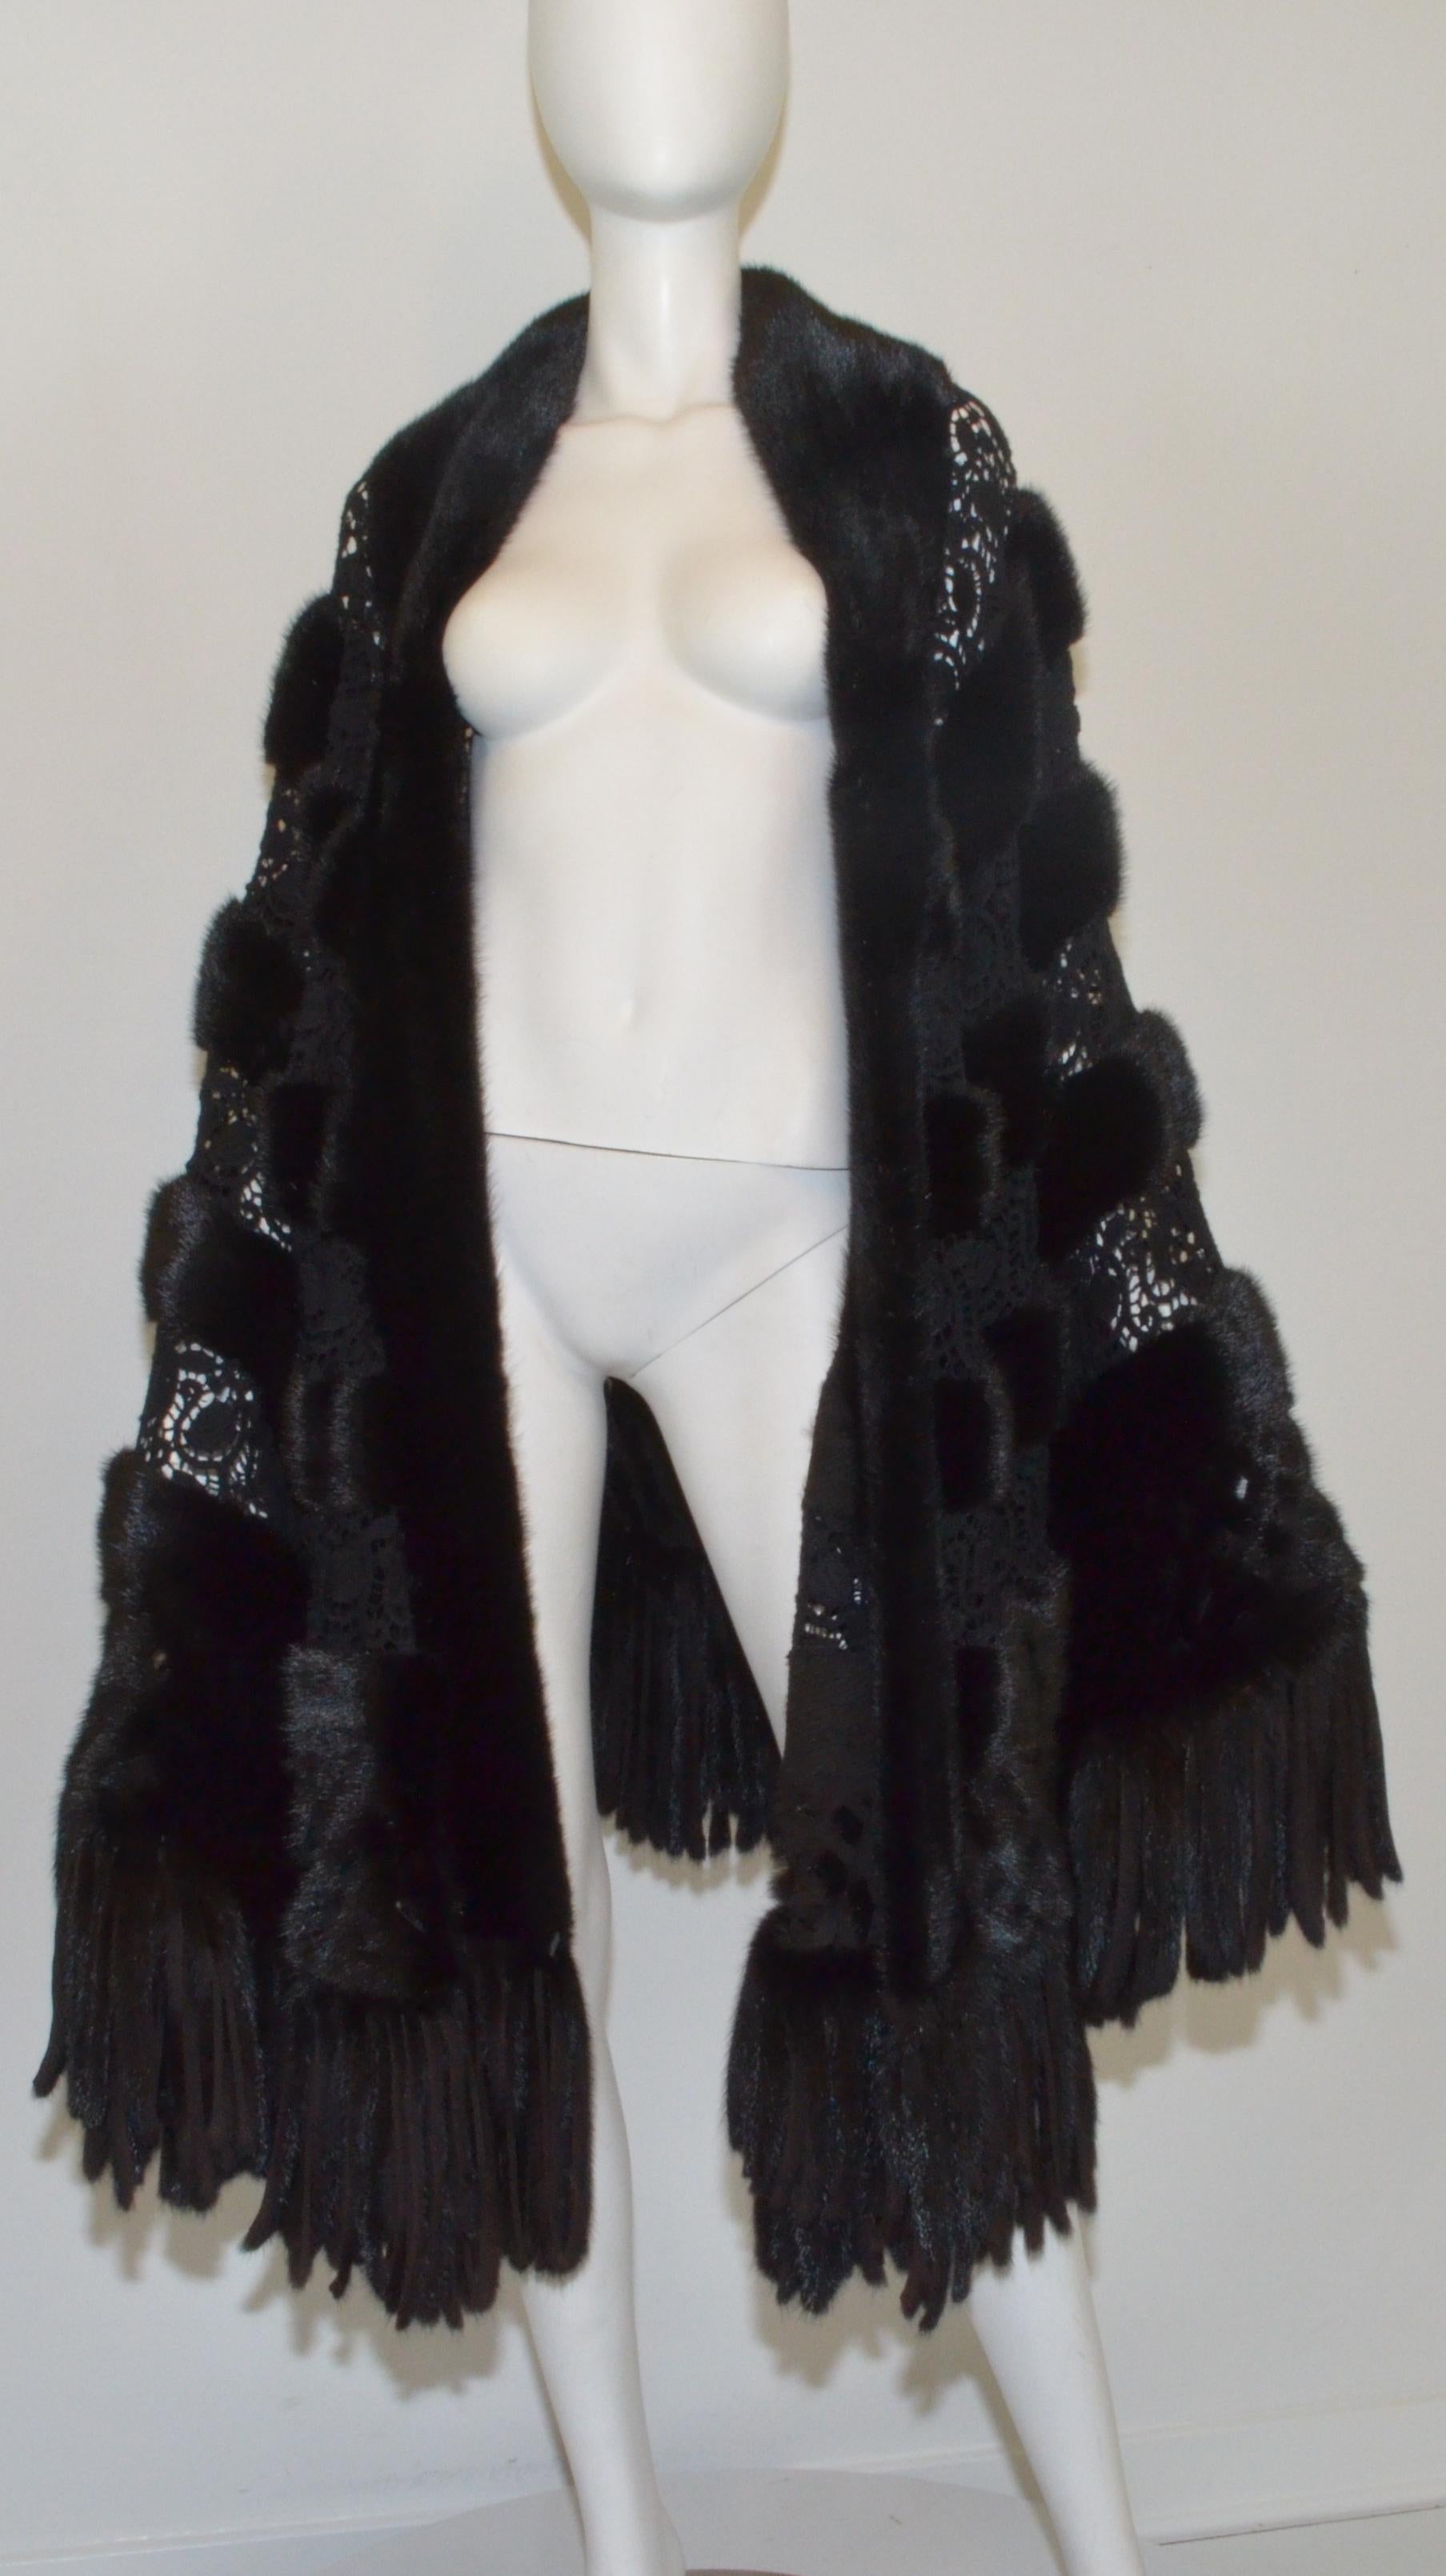 Amazing Giuliana Teso stole is featured in black mink fur with crochet lace panels and a fringed hem. Made in Italy. 

Approximate length 41''